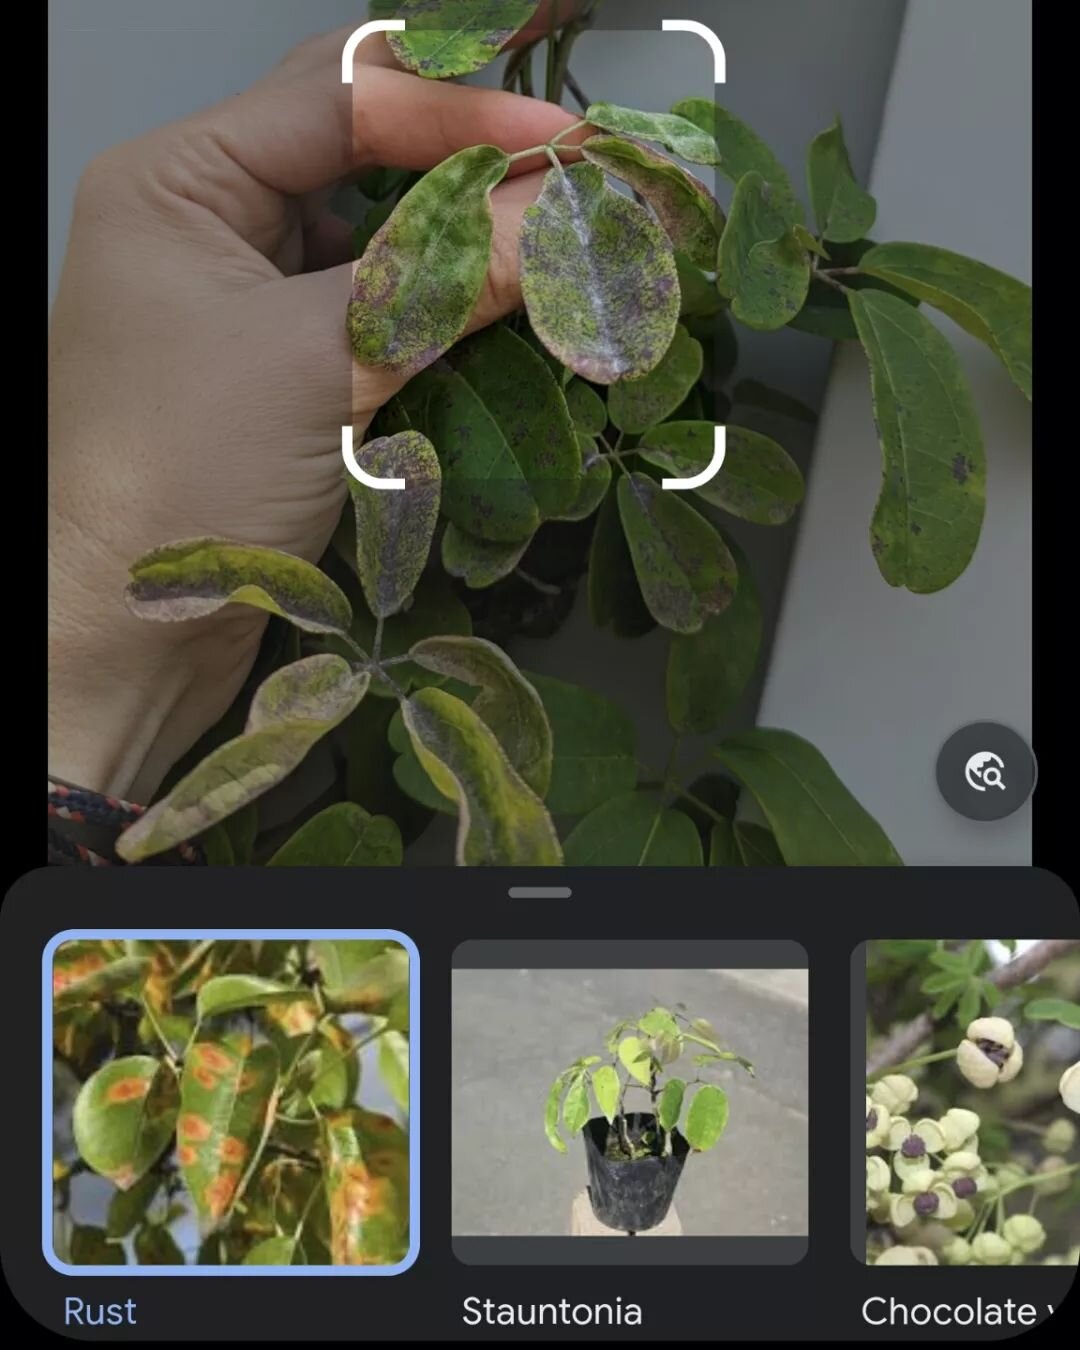 If you have questions about your garden, ask Google Lens. I've found it's better than plant apps. You can ask it about bugs in addition to diseases and the flower type

Garden Report

Cold crops like the sweet peas burned up in the 90 degree heat the